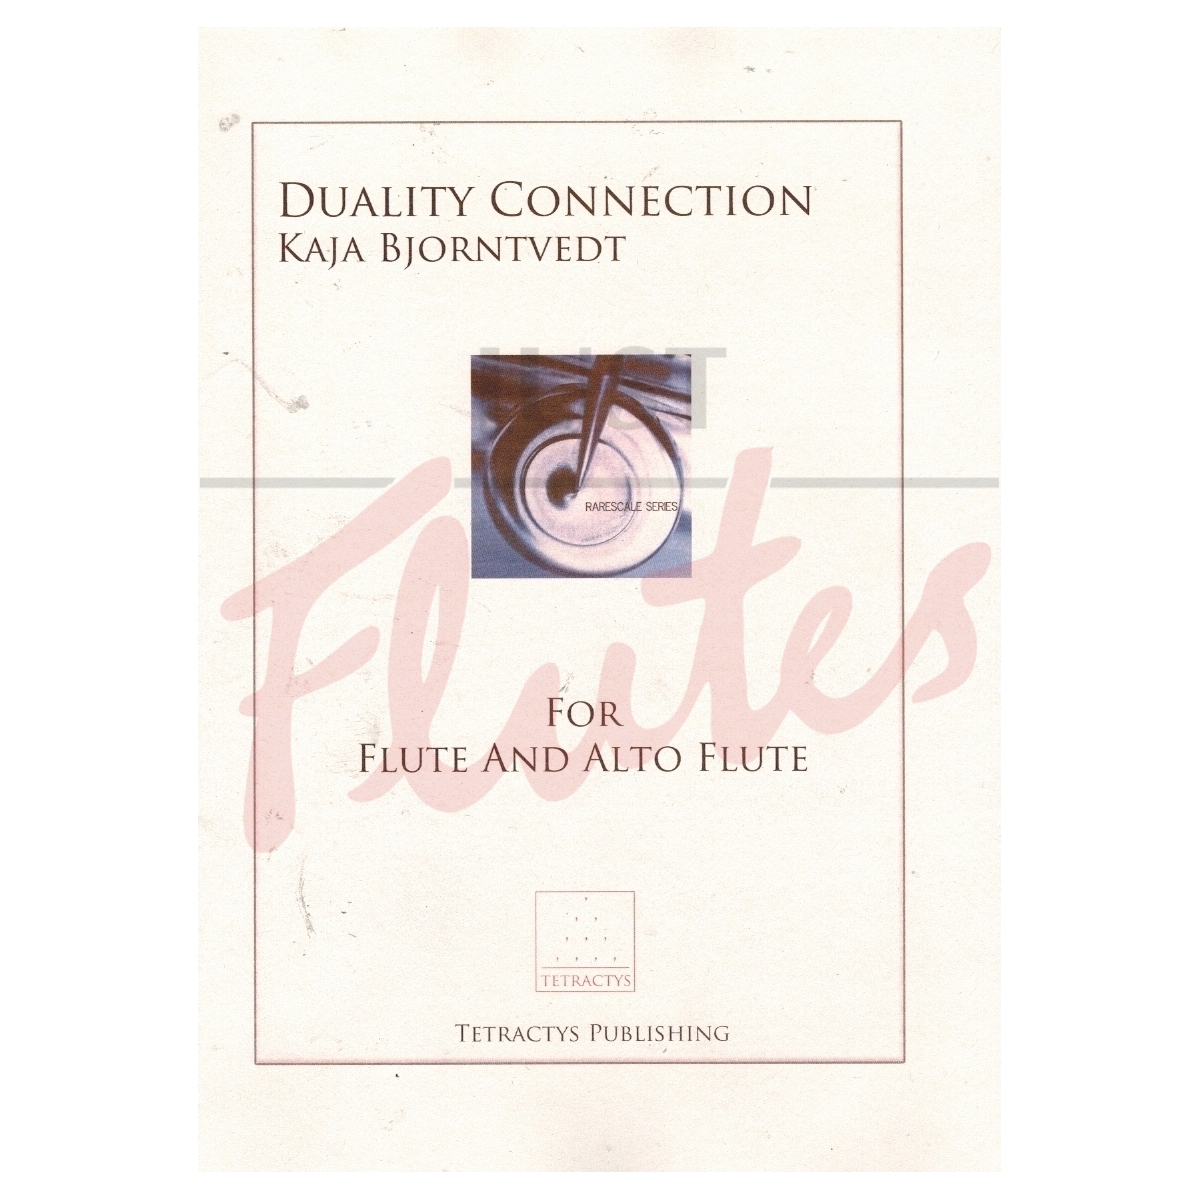 Duality Connection for Flute and Alto Flute